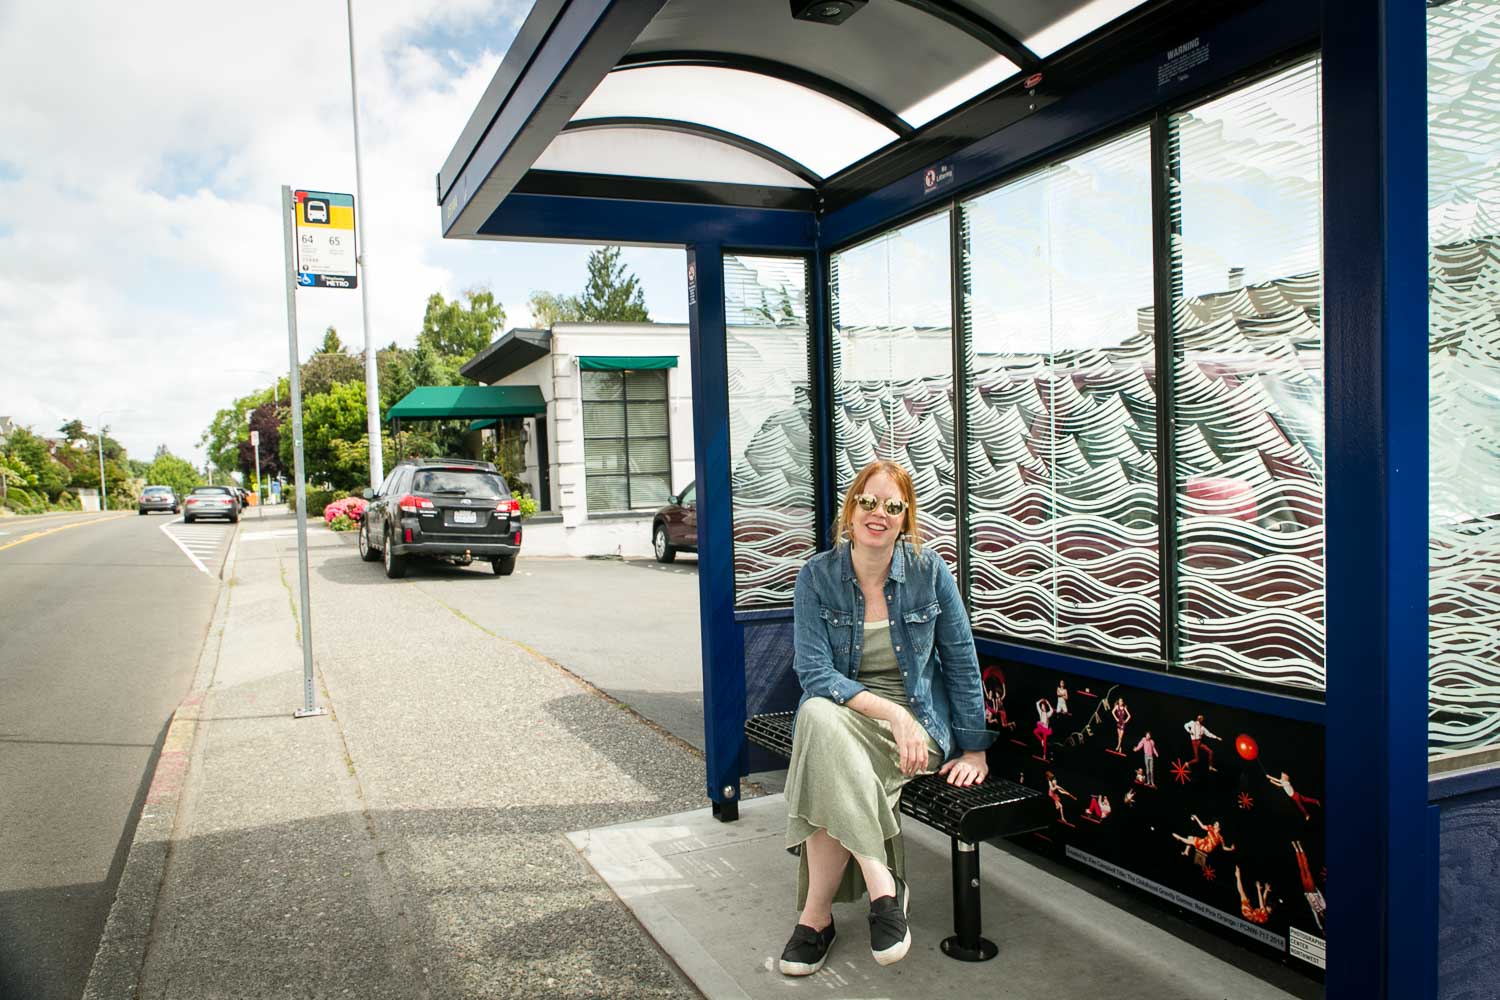 kim-campbell-panorama-bus-bench-35th-ave-seattle_03.jpg